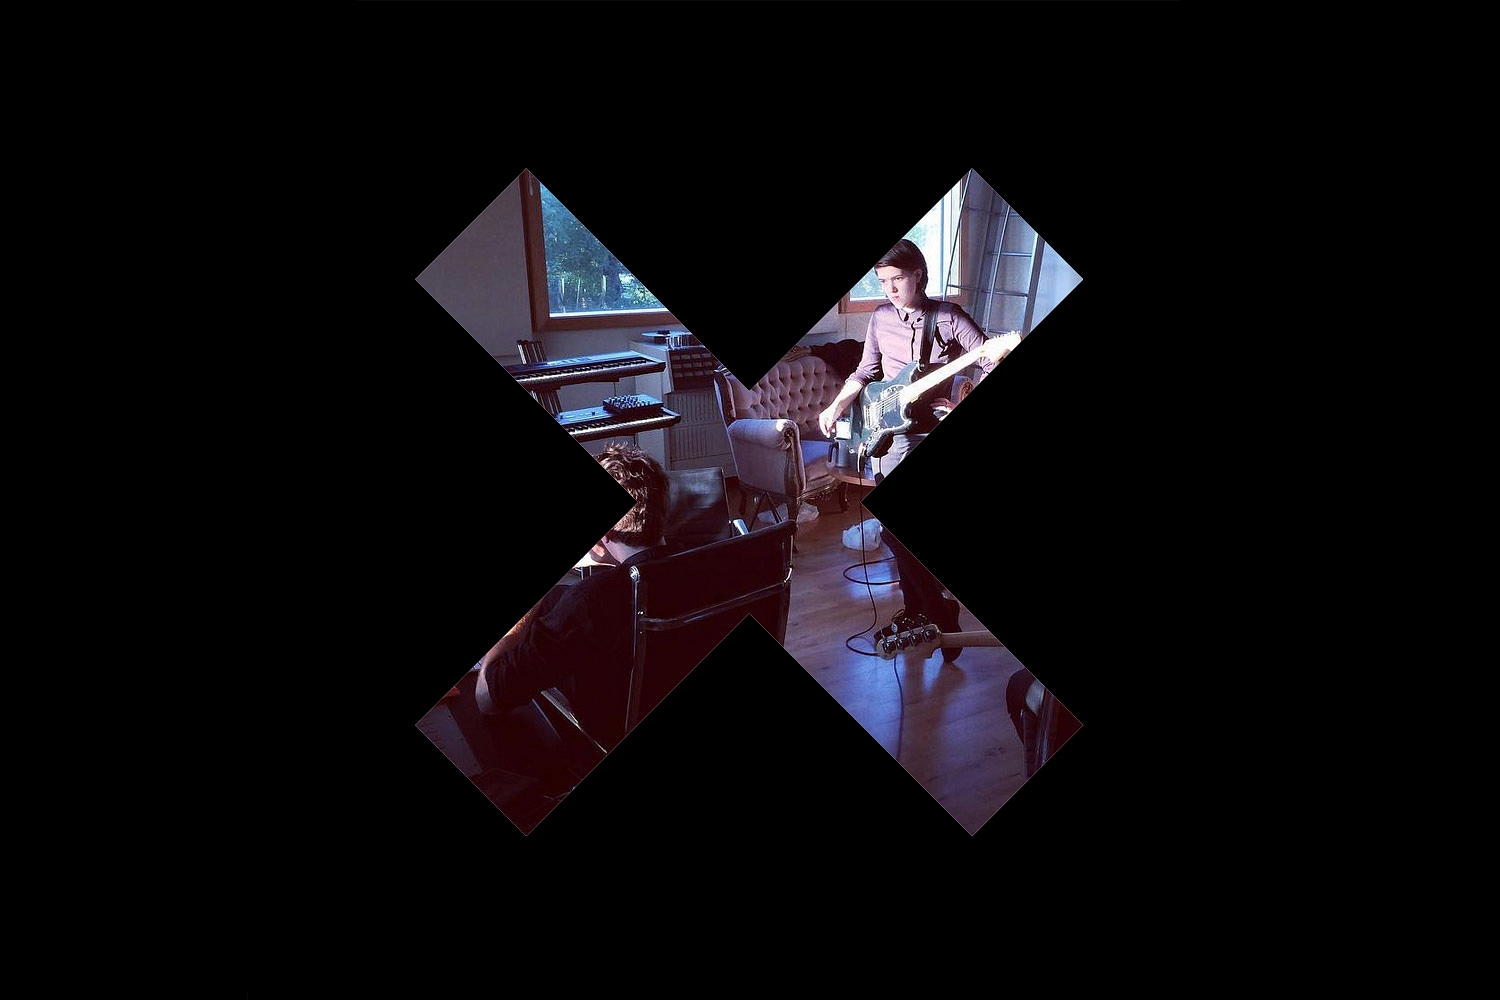 The return of The xx might be their most cohesive moment to date